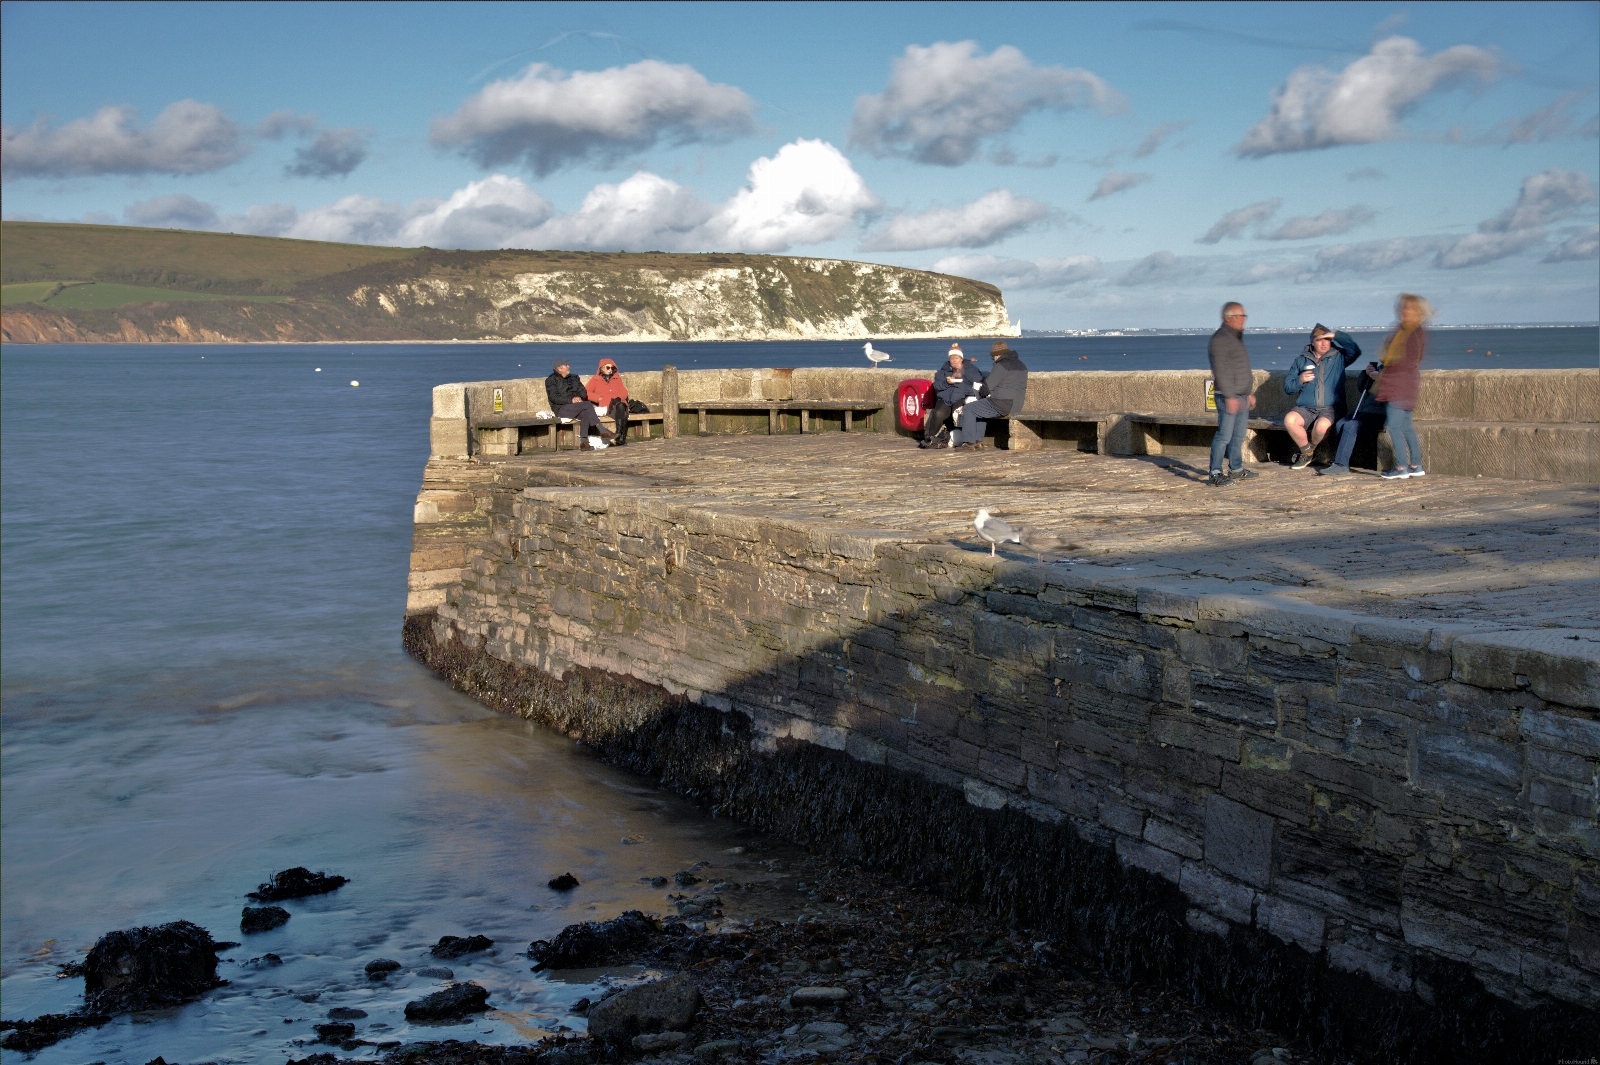 Image of Swanage by michael bennett